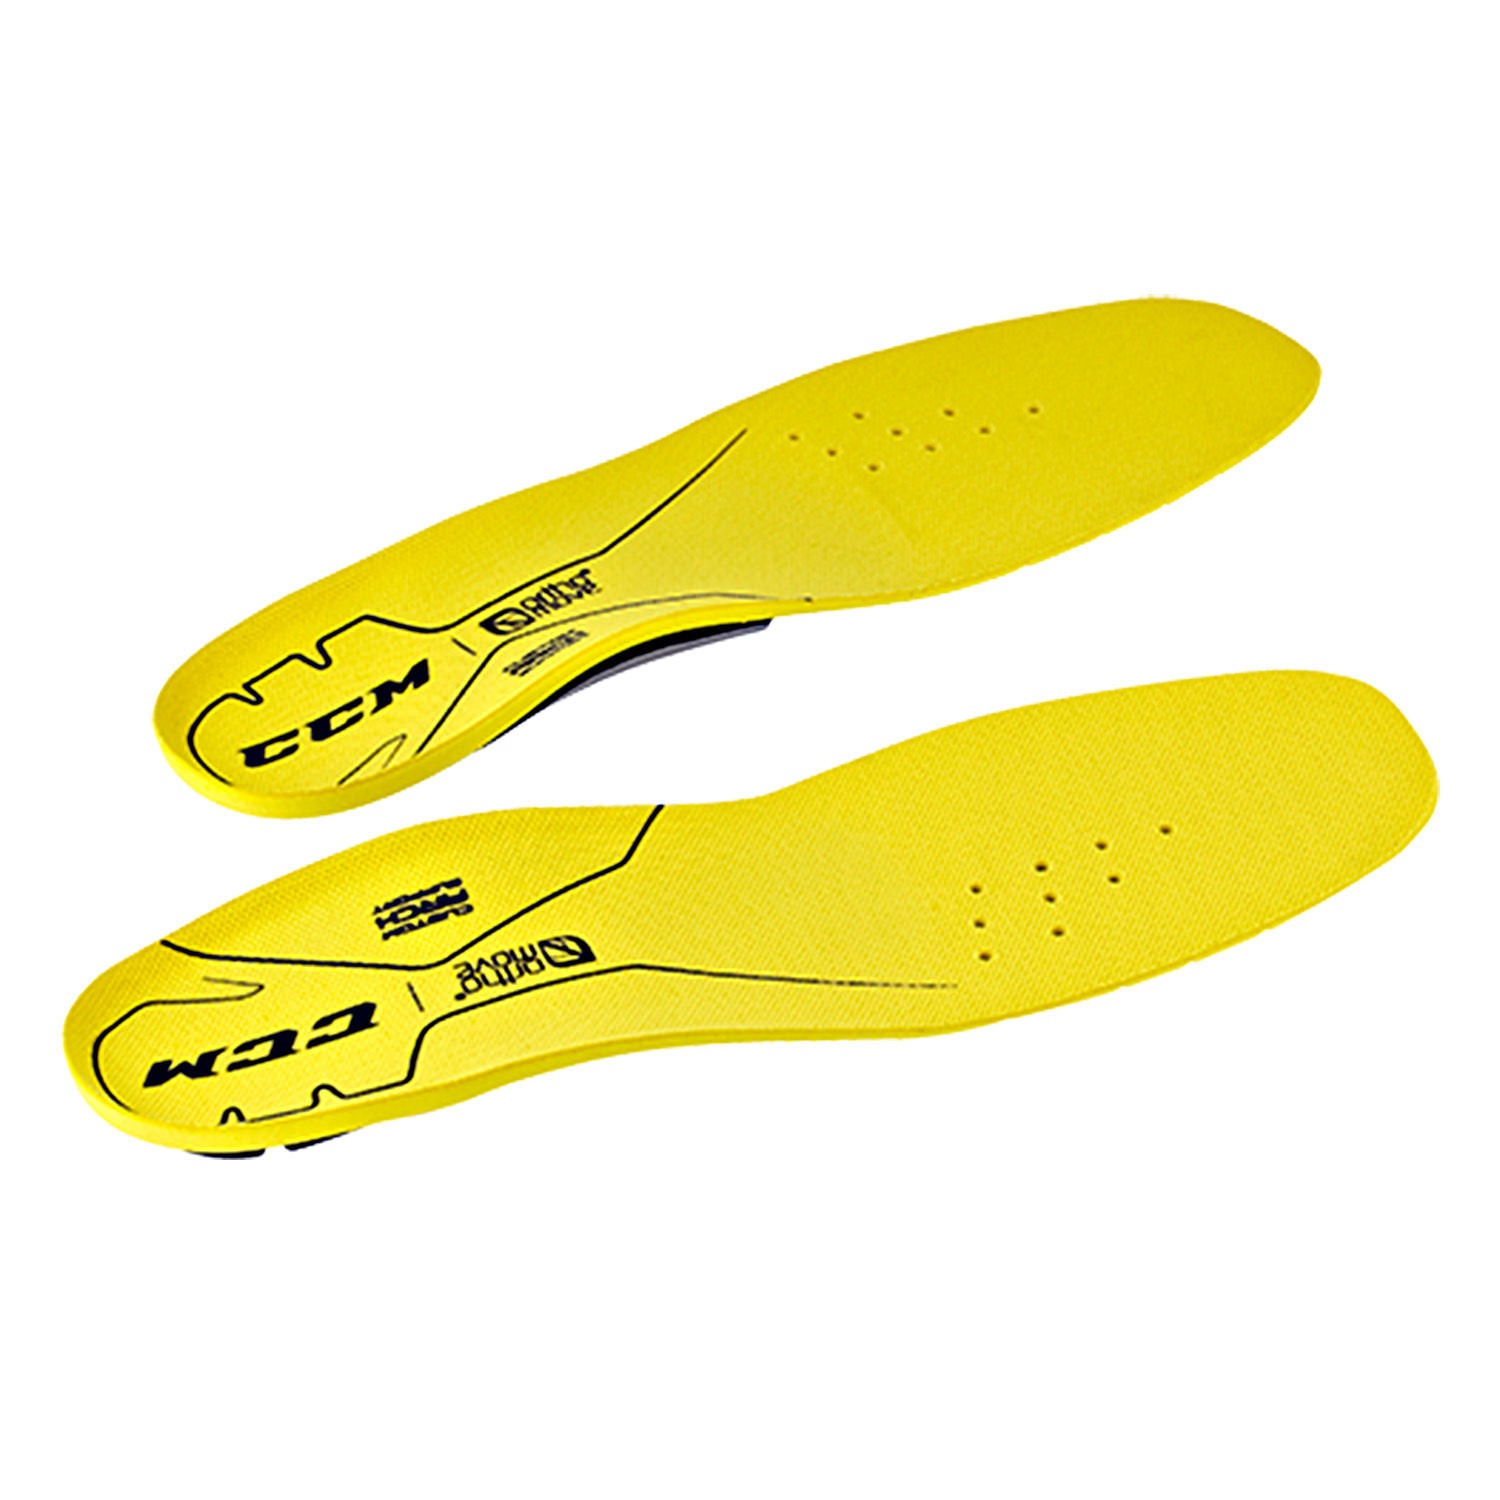 ccm custom support insoles